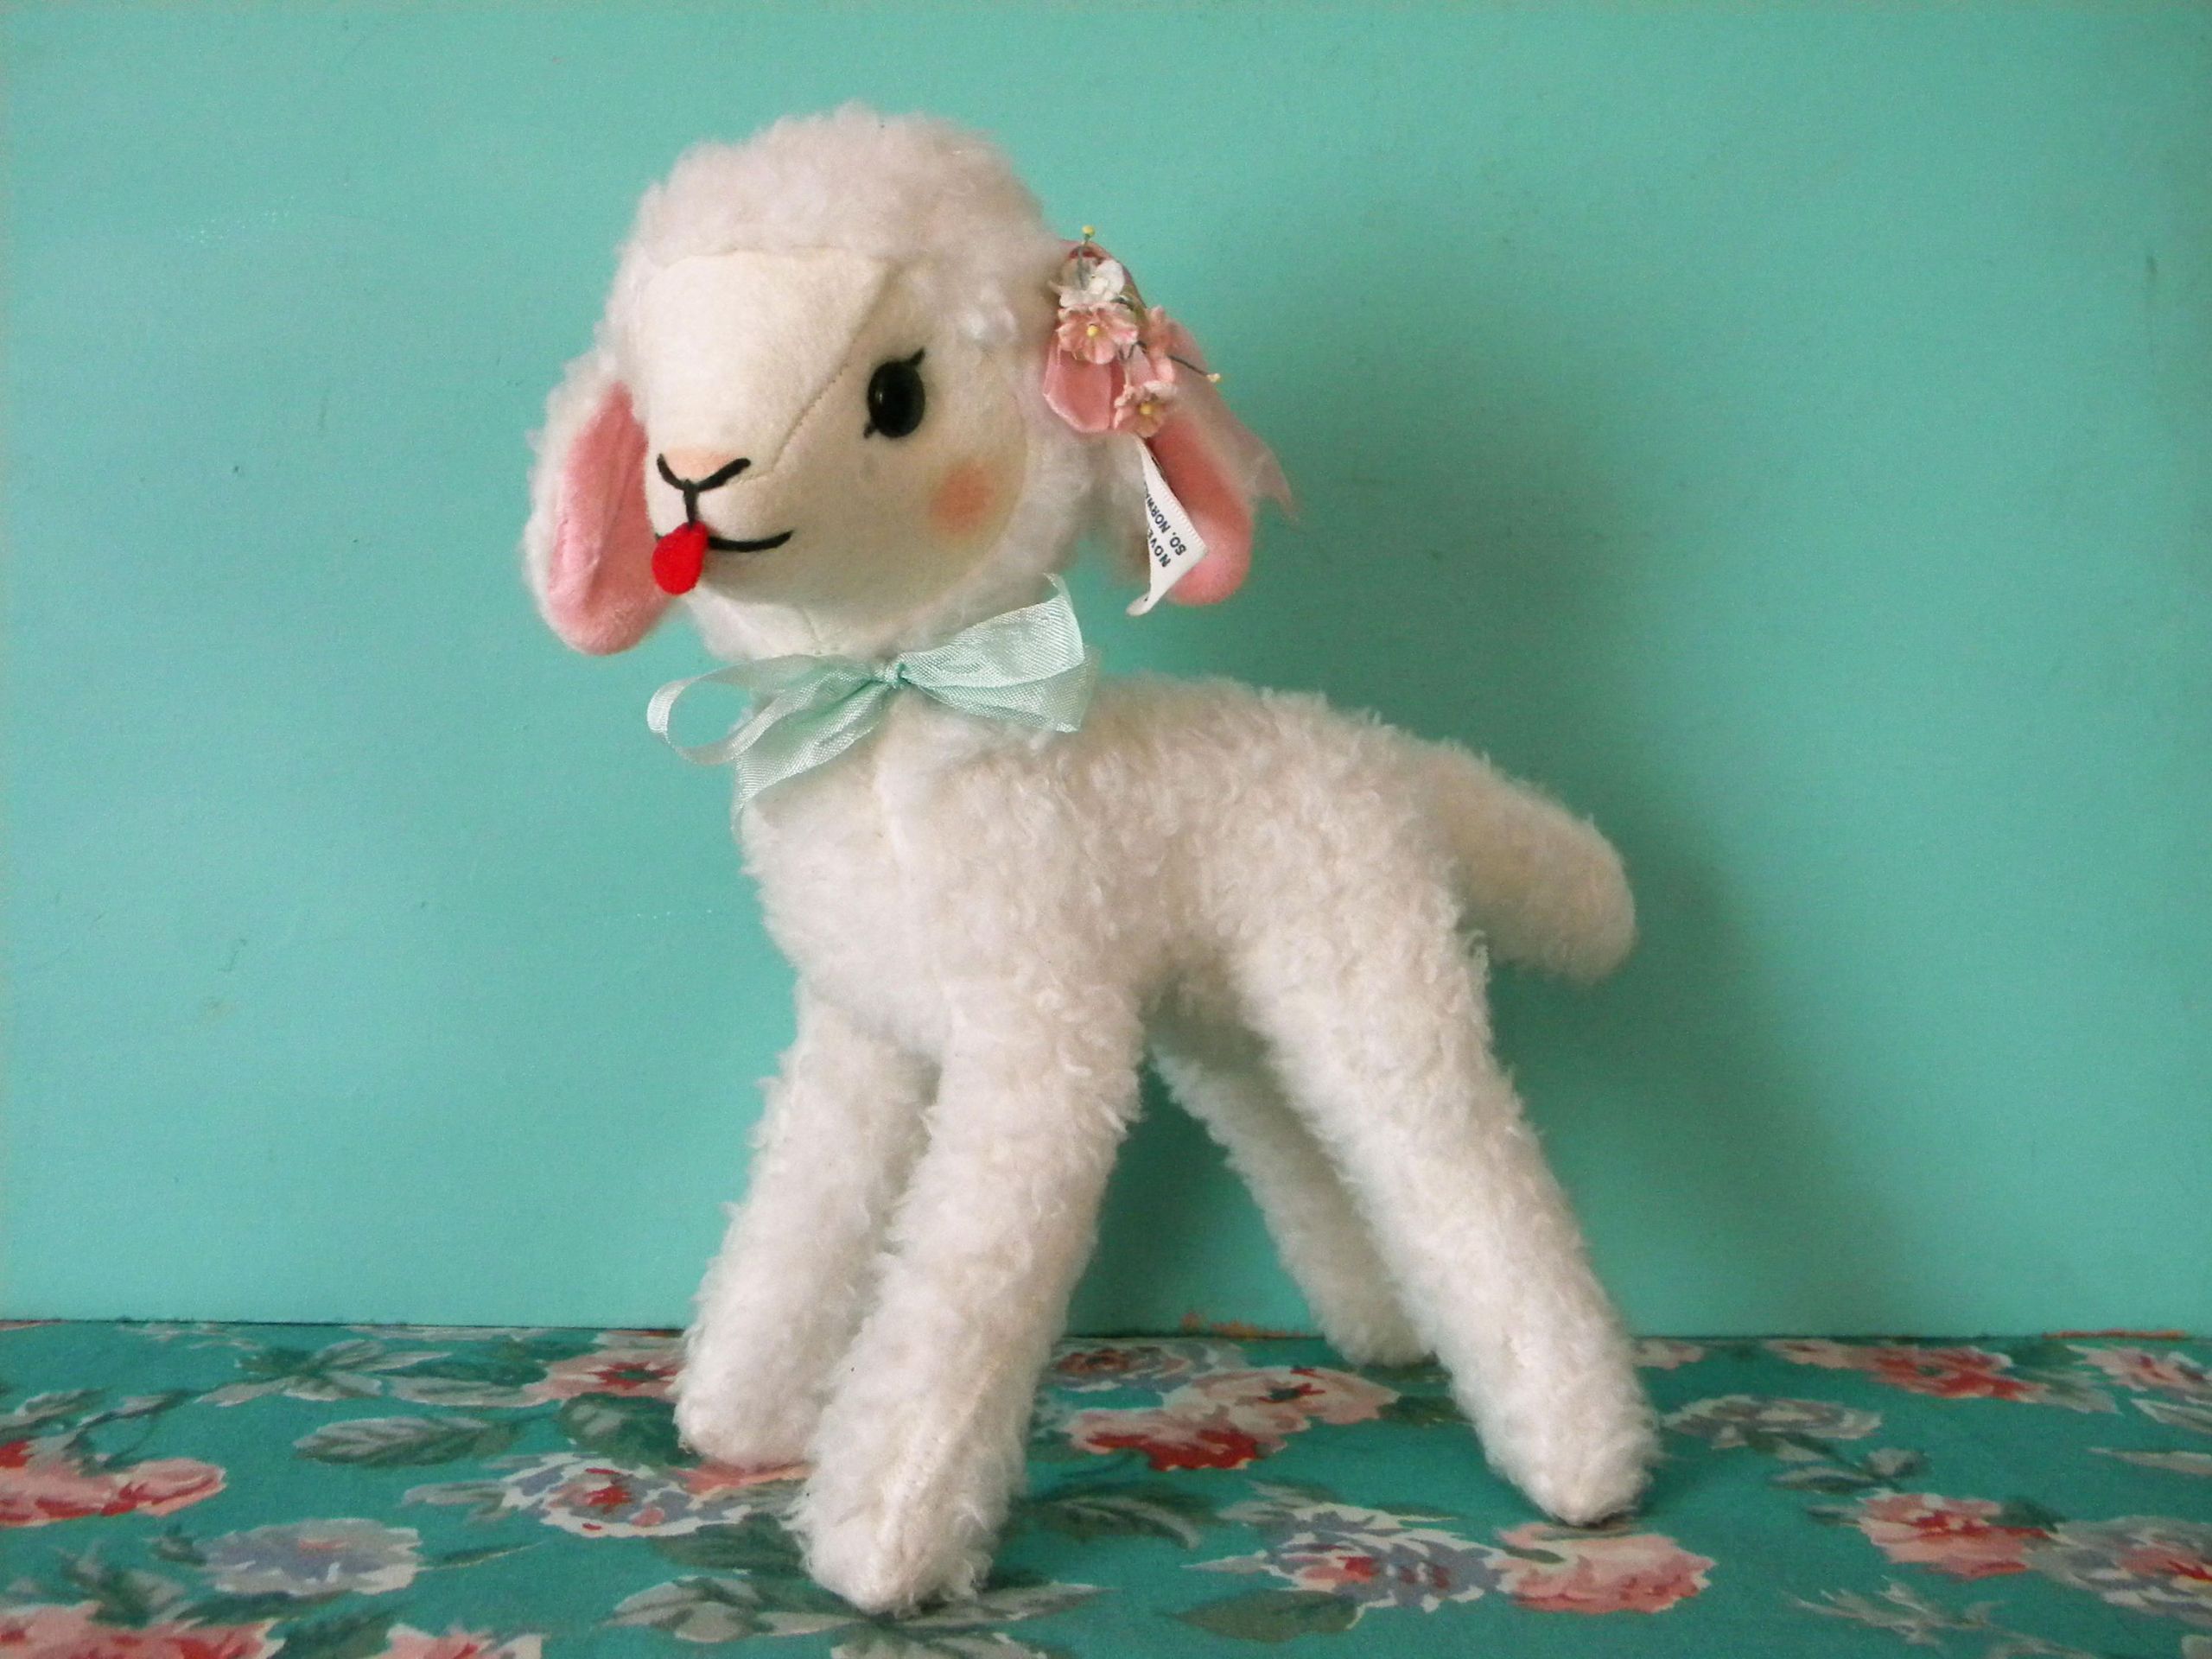 Easter Lamb Stuffed Animal
 Vintage Easter Lamb Stuffed Plush Toy with Rosy Cheeks and